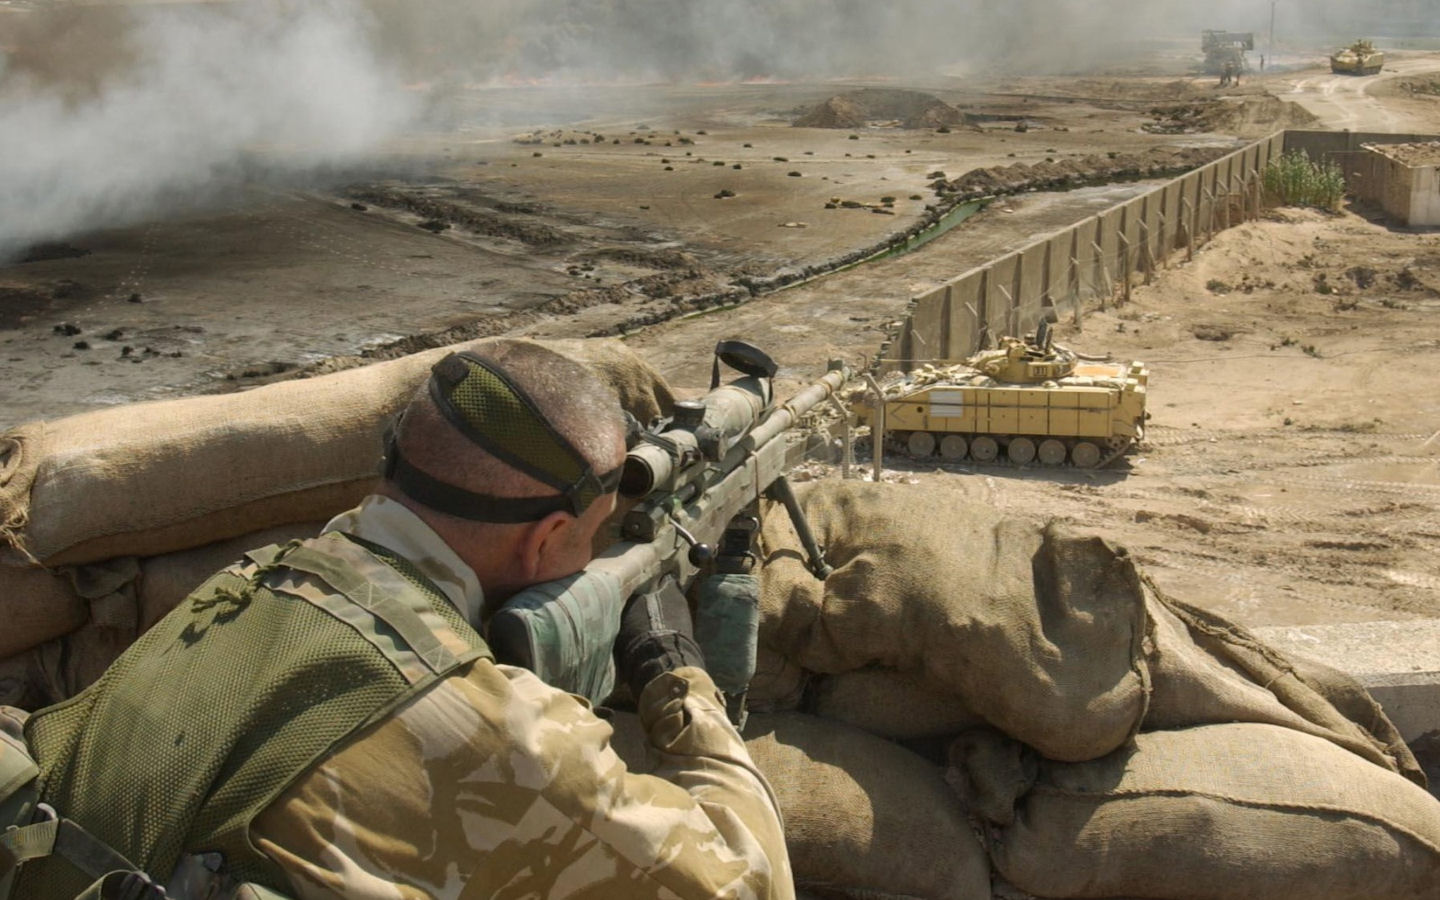 Us Army Sniper 8526 Hd Wallpapers in War n Army   Imagescicom 1440x900